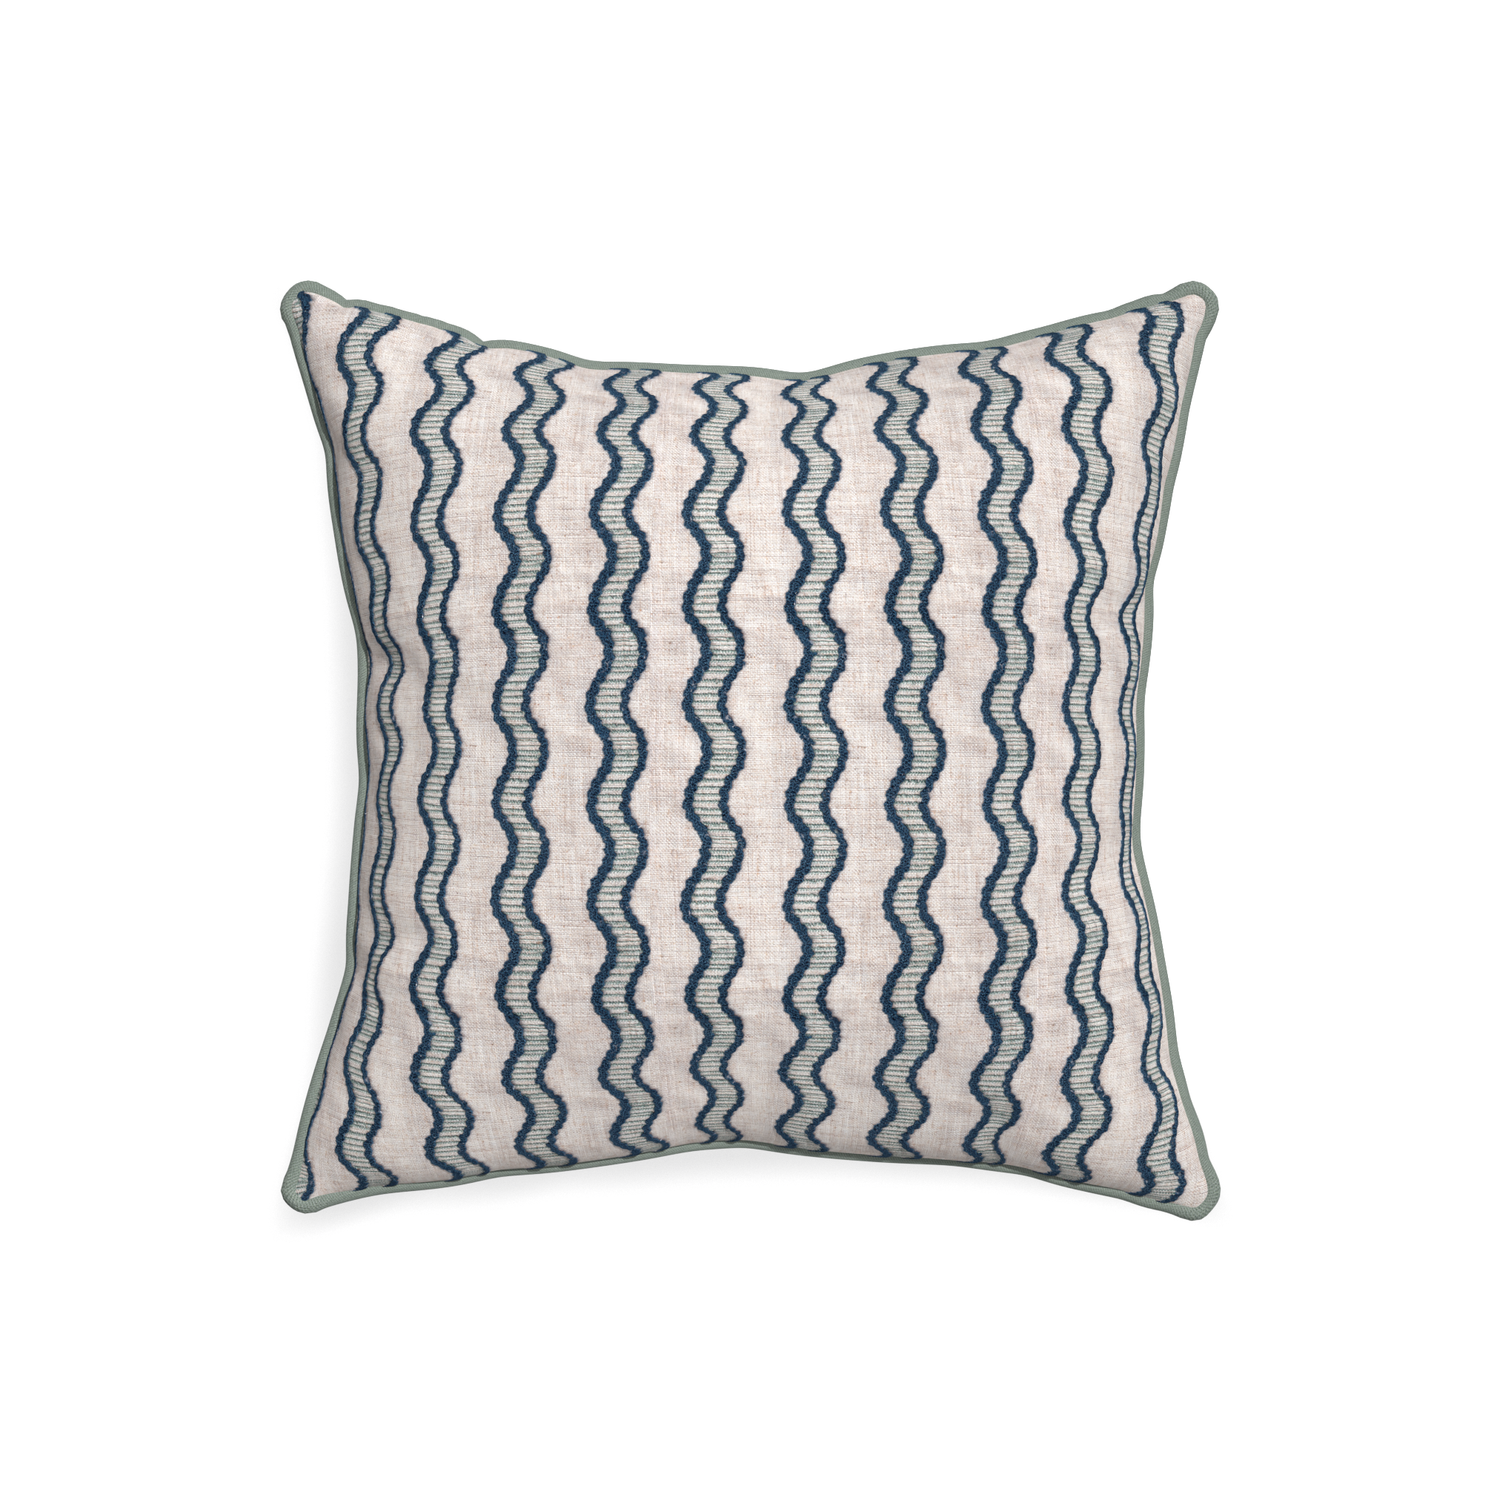 20-square beatrice custom embroidered wavepillow with sage piping on white background